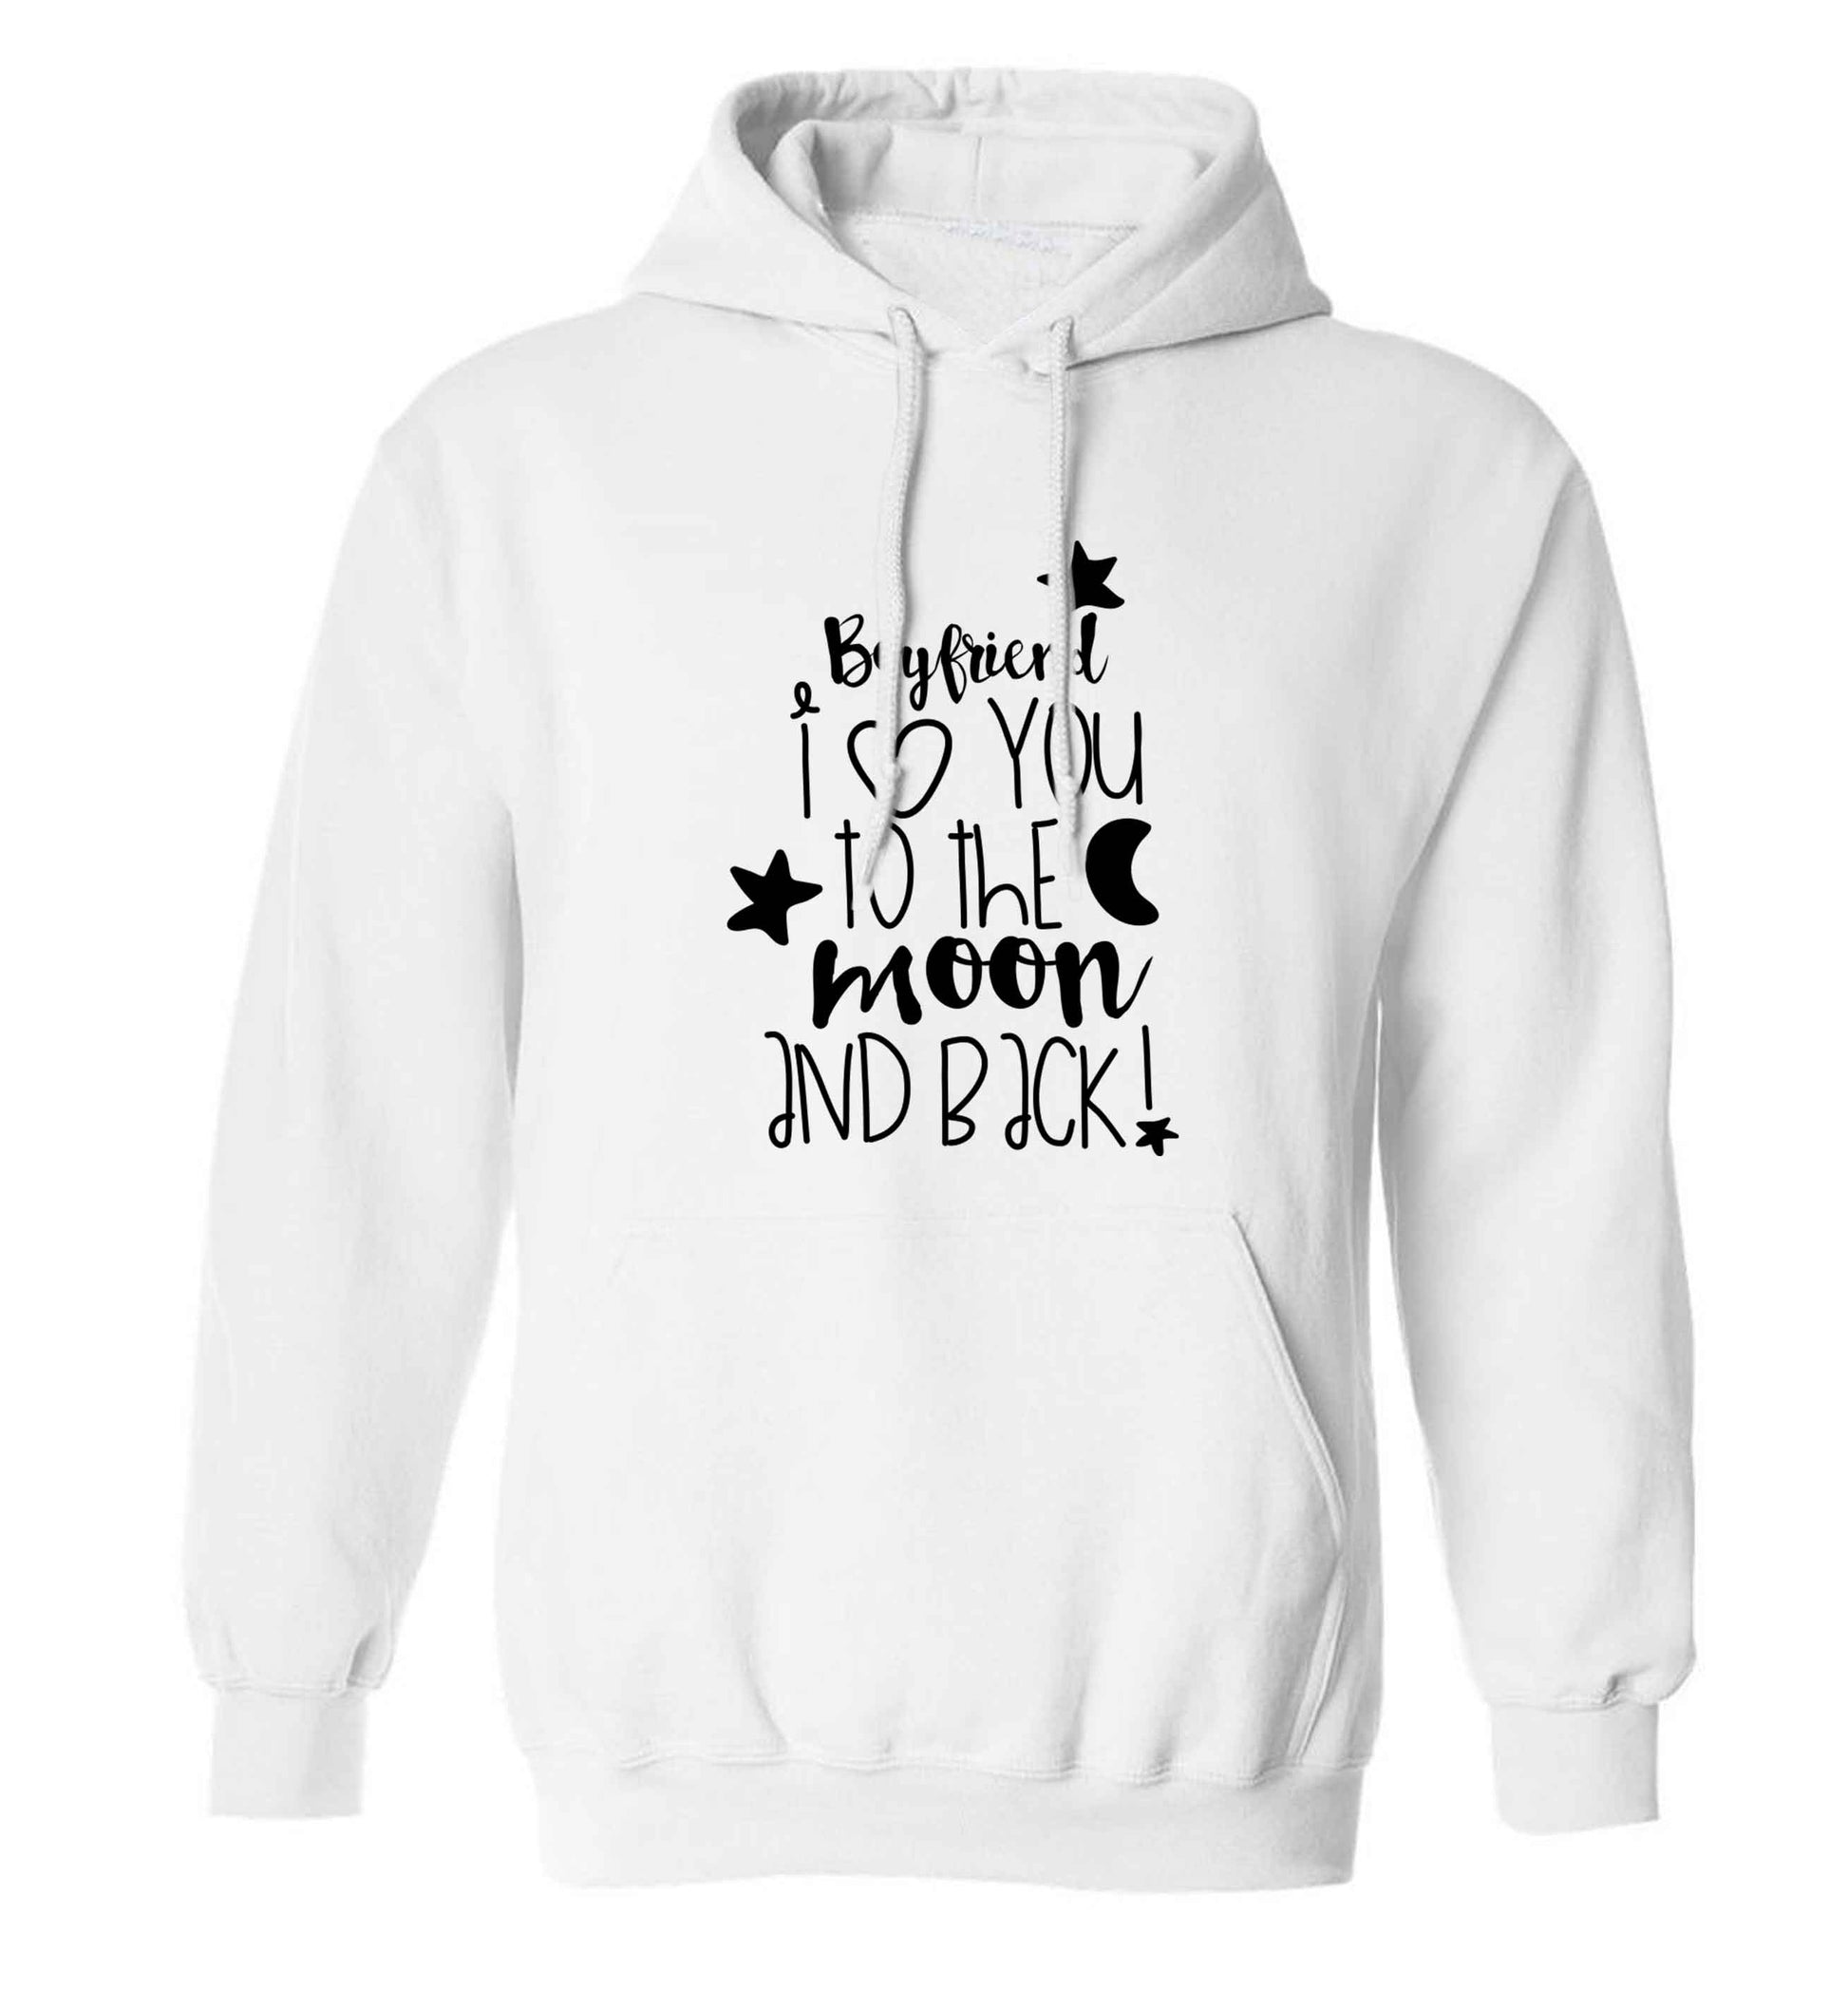 Boyfriend I love you to the moon and back adults unisex white hoodie 2XL